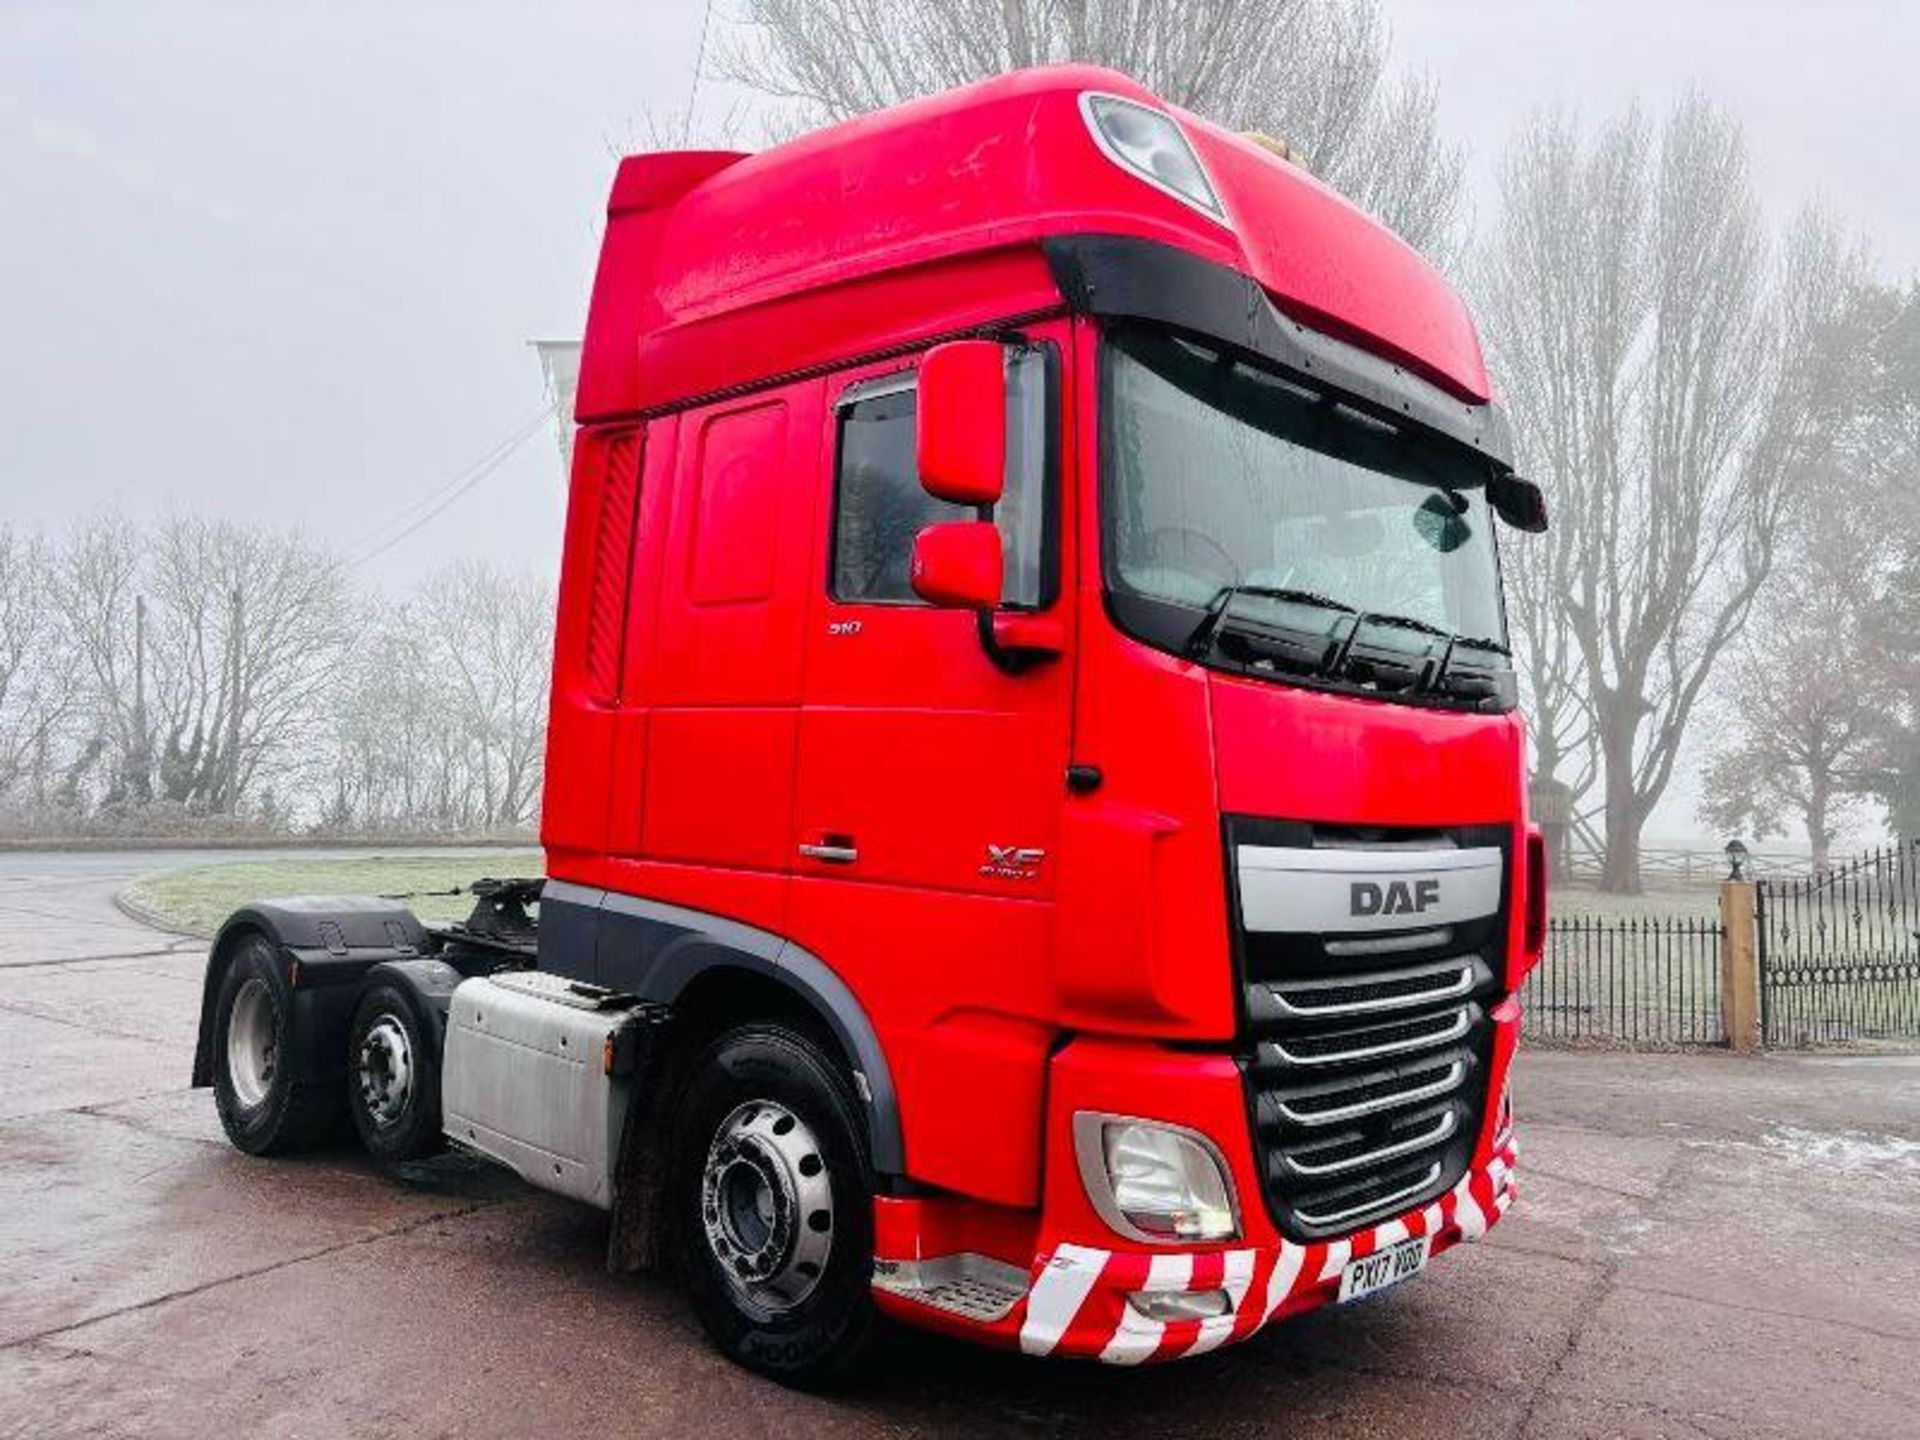 DAF XF510 6X2 TRACTOR UNIT *YEAR 2017* C/W MANUAL GEAR BOX & TIPPING GEAR - READING 477802 KMS - Image 5 of 8